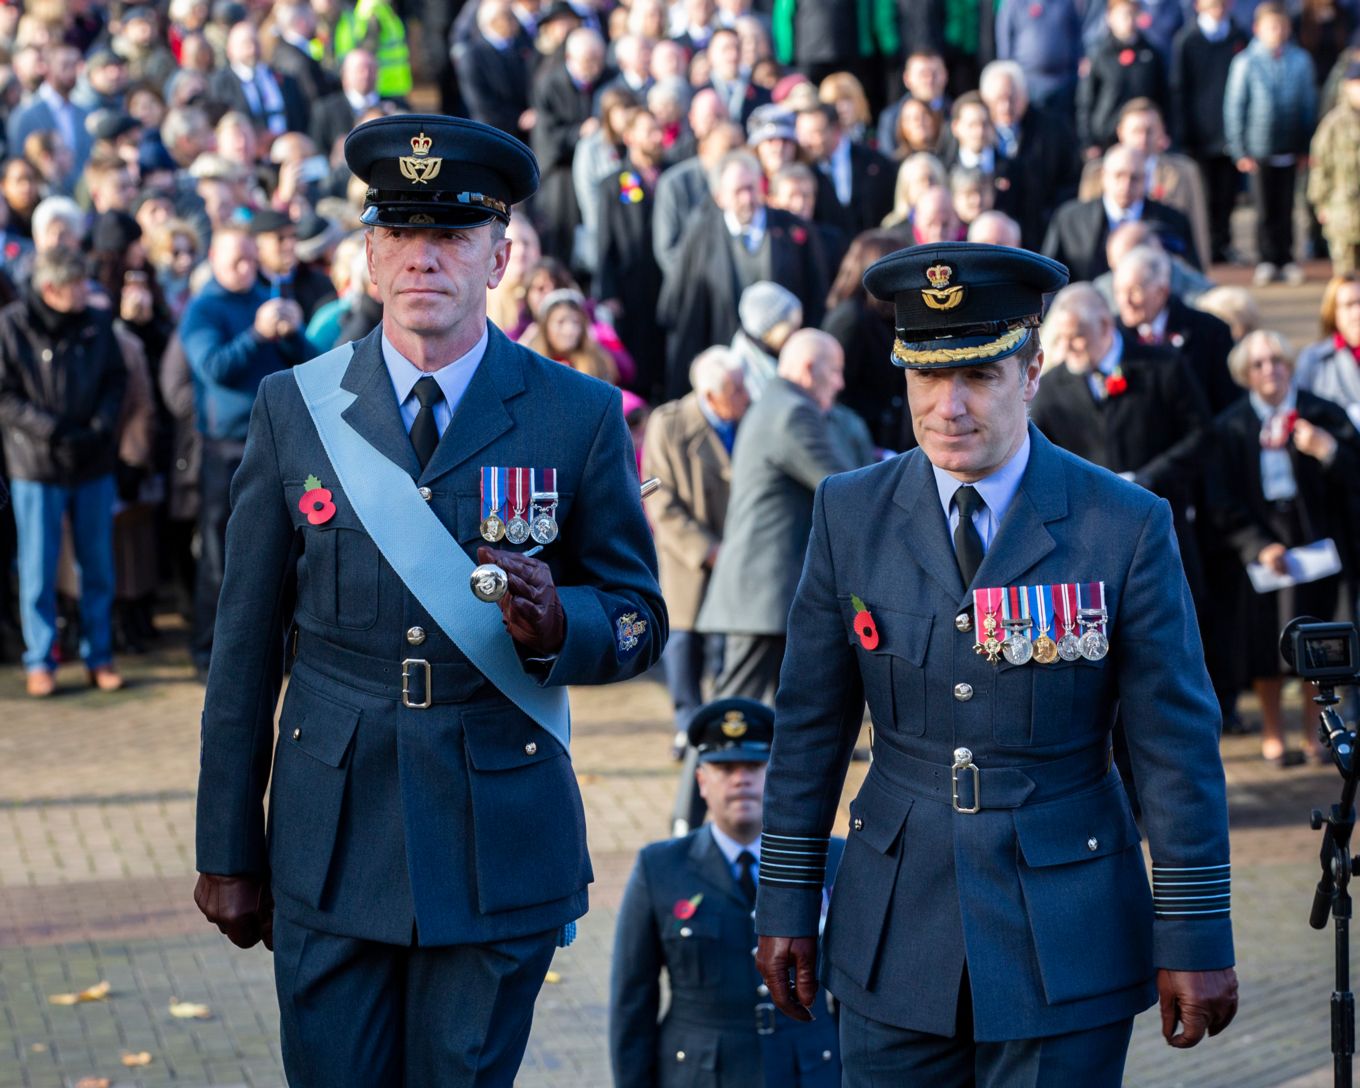 Stn Cdr Tone Baker and the SWO Mr Hagan in Wolverhampton attending Remembrance parade